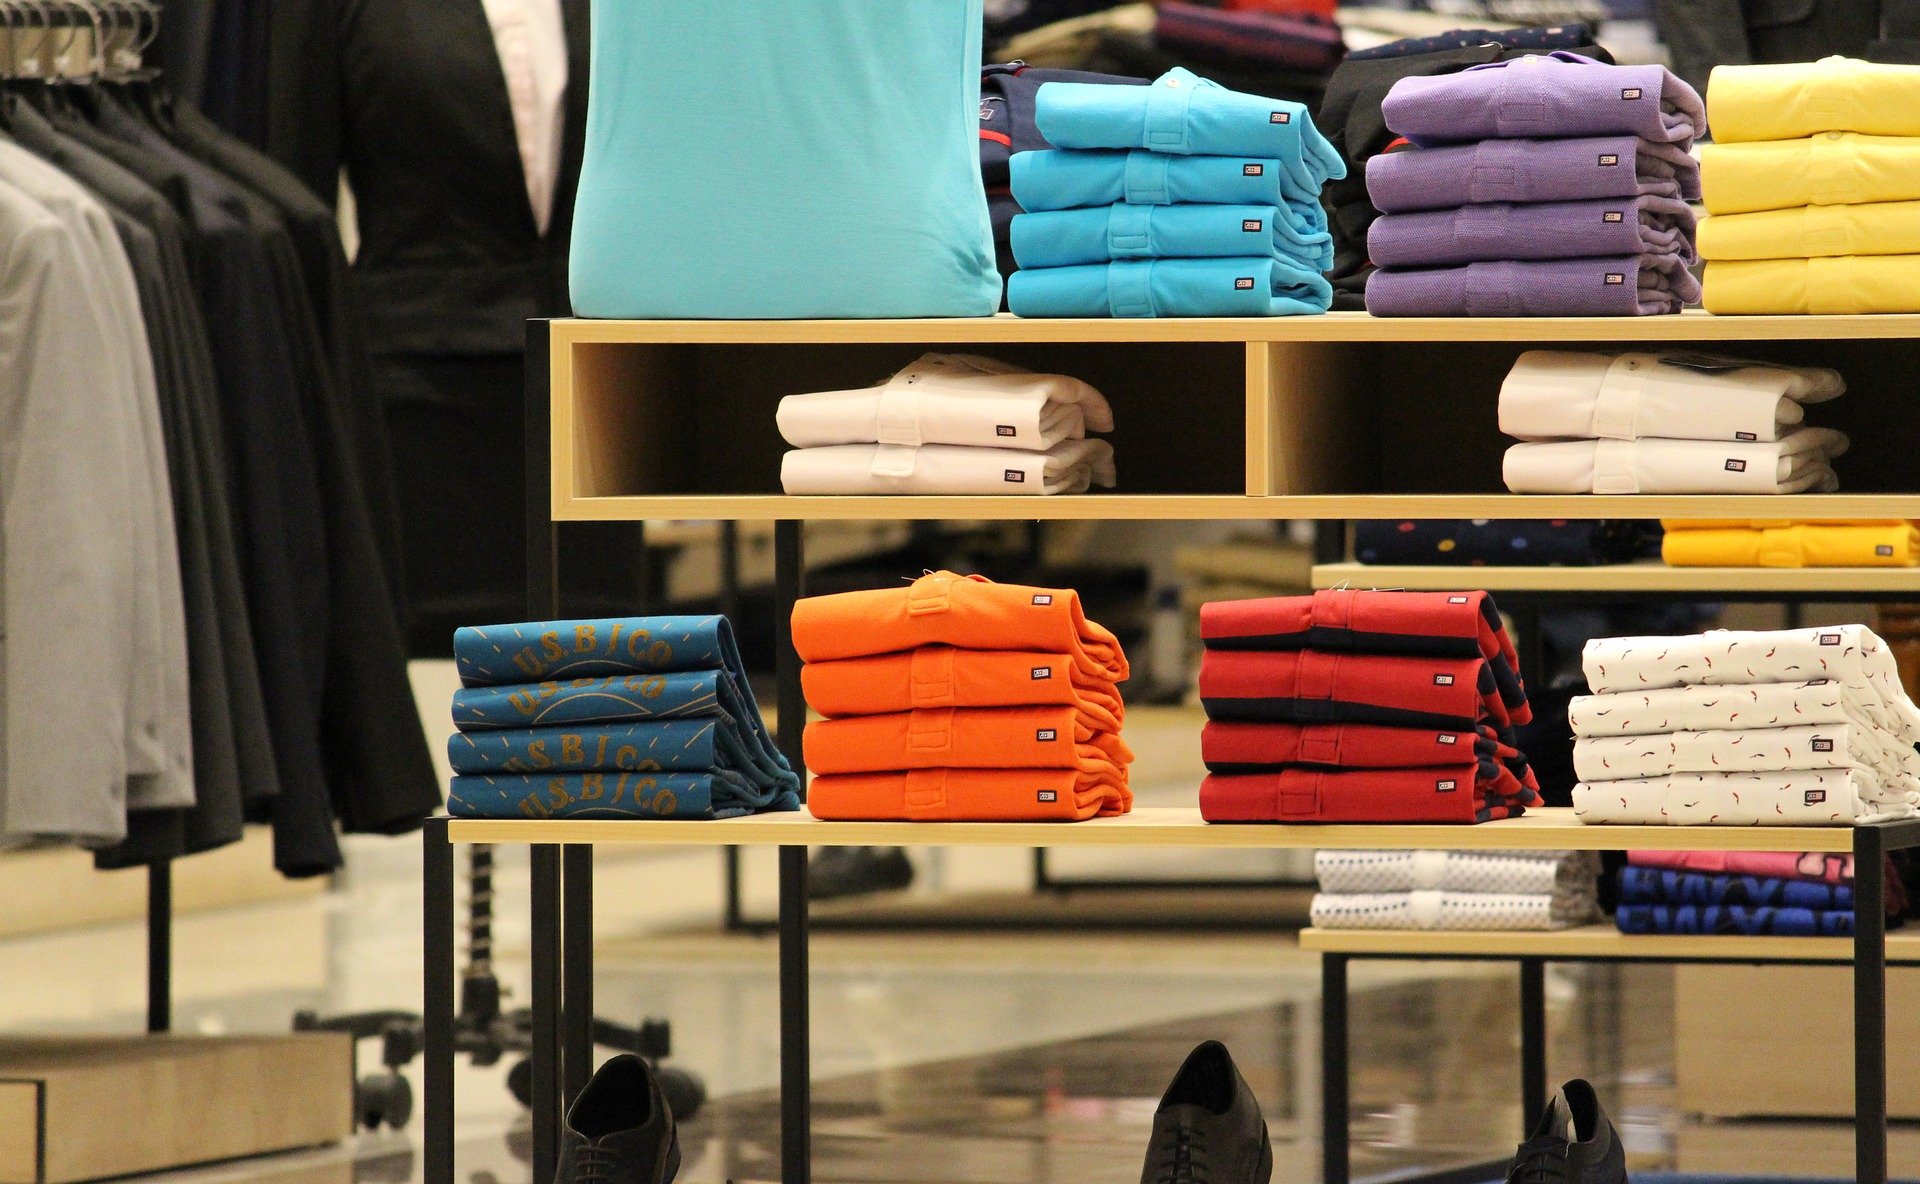 Stacks of tee shirts in a store display.